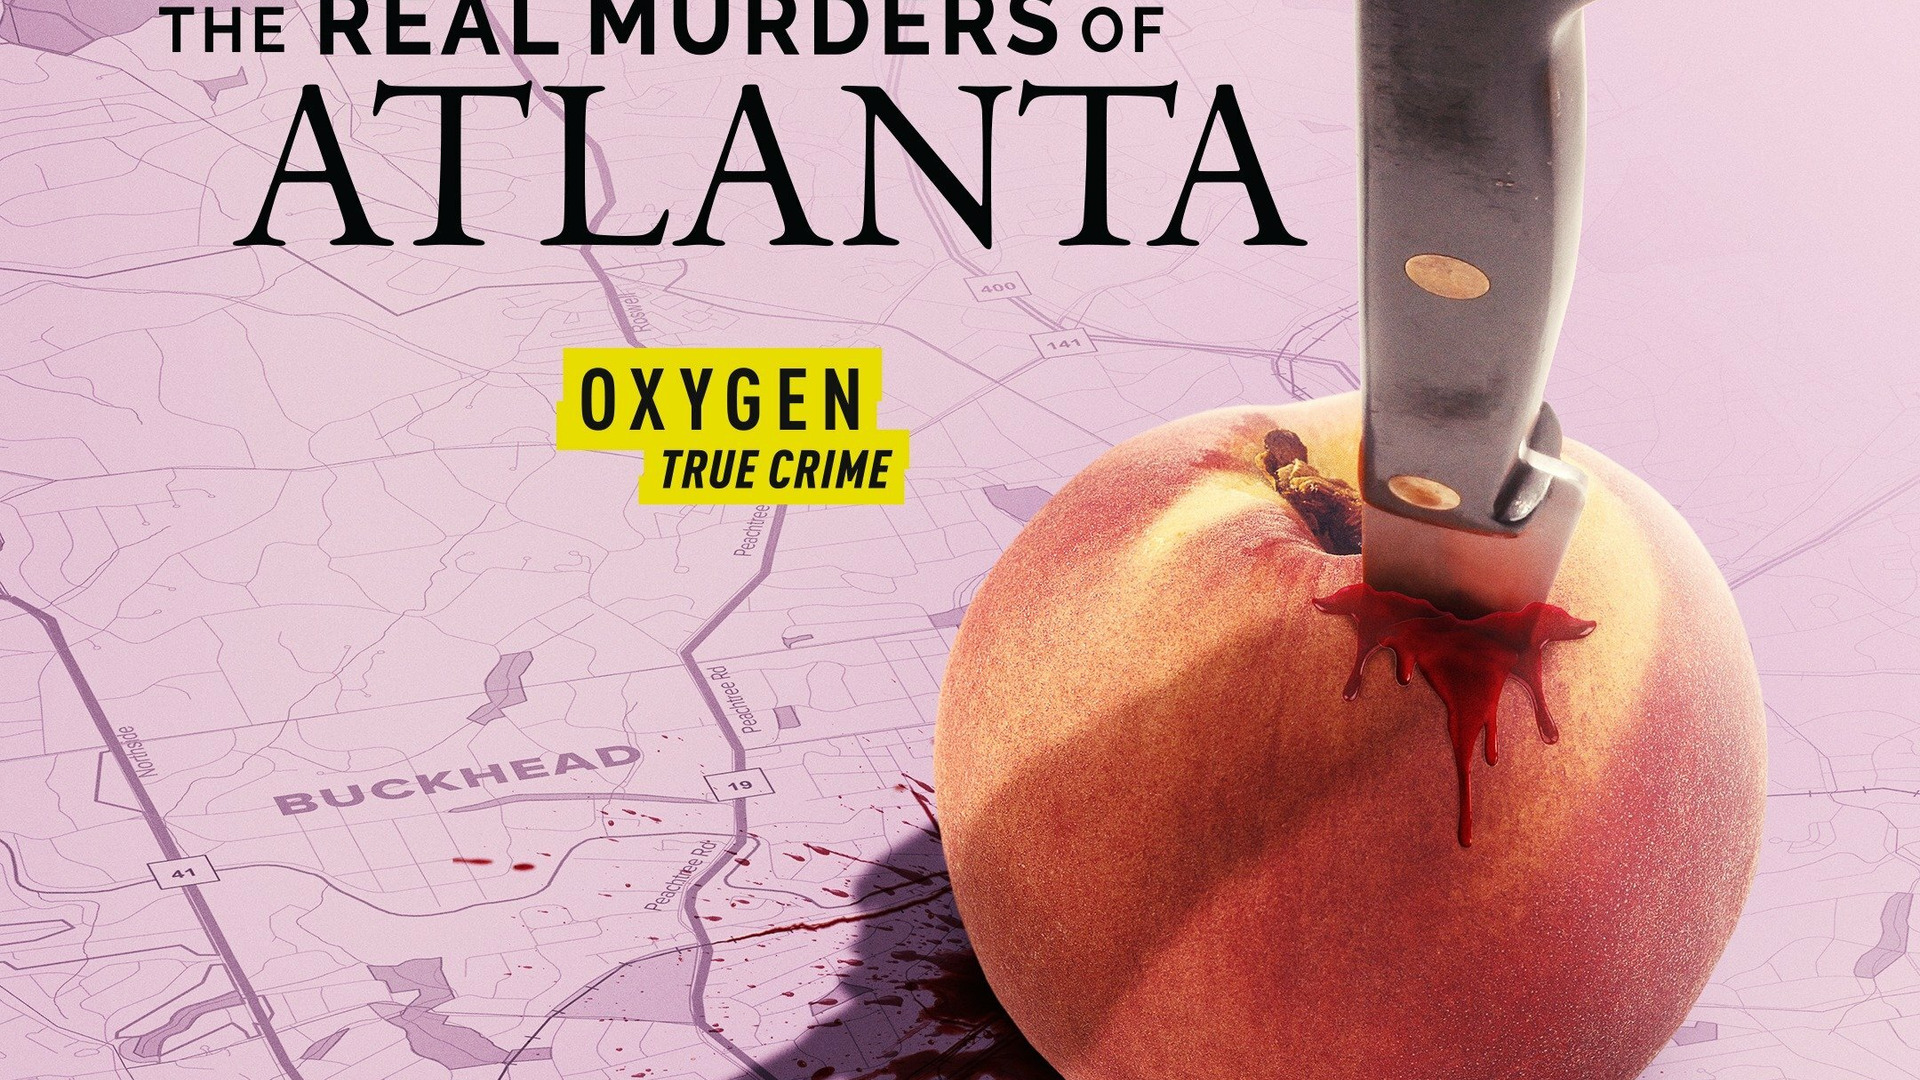 Show The Real Murders of Atlanta